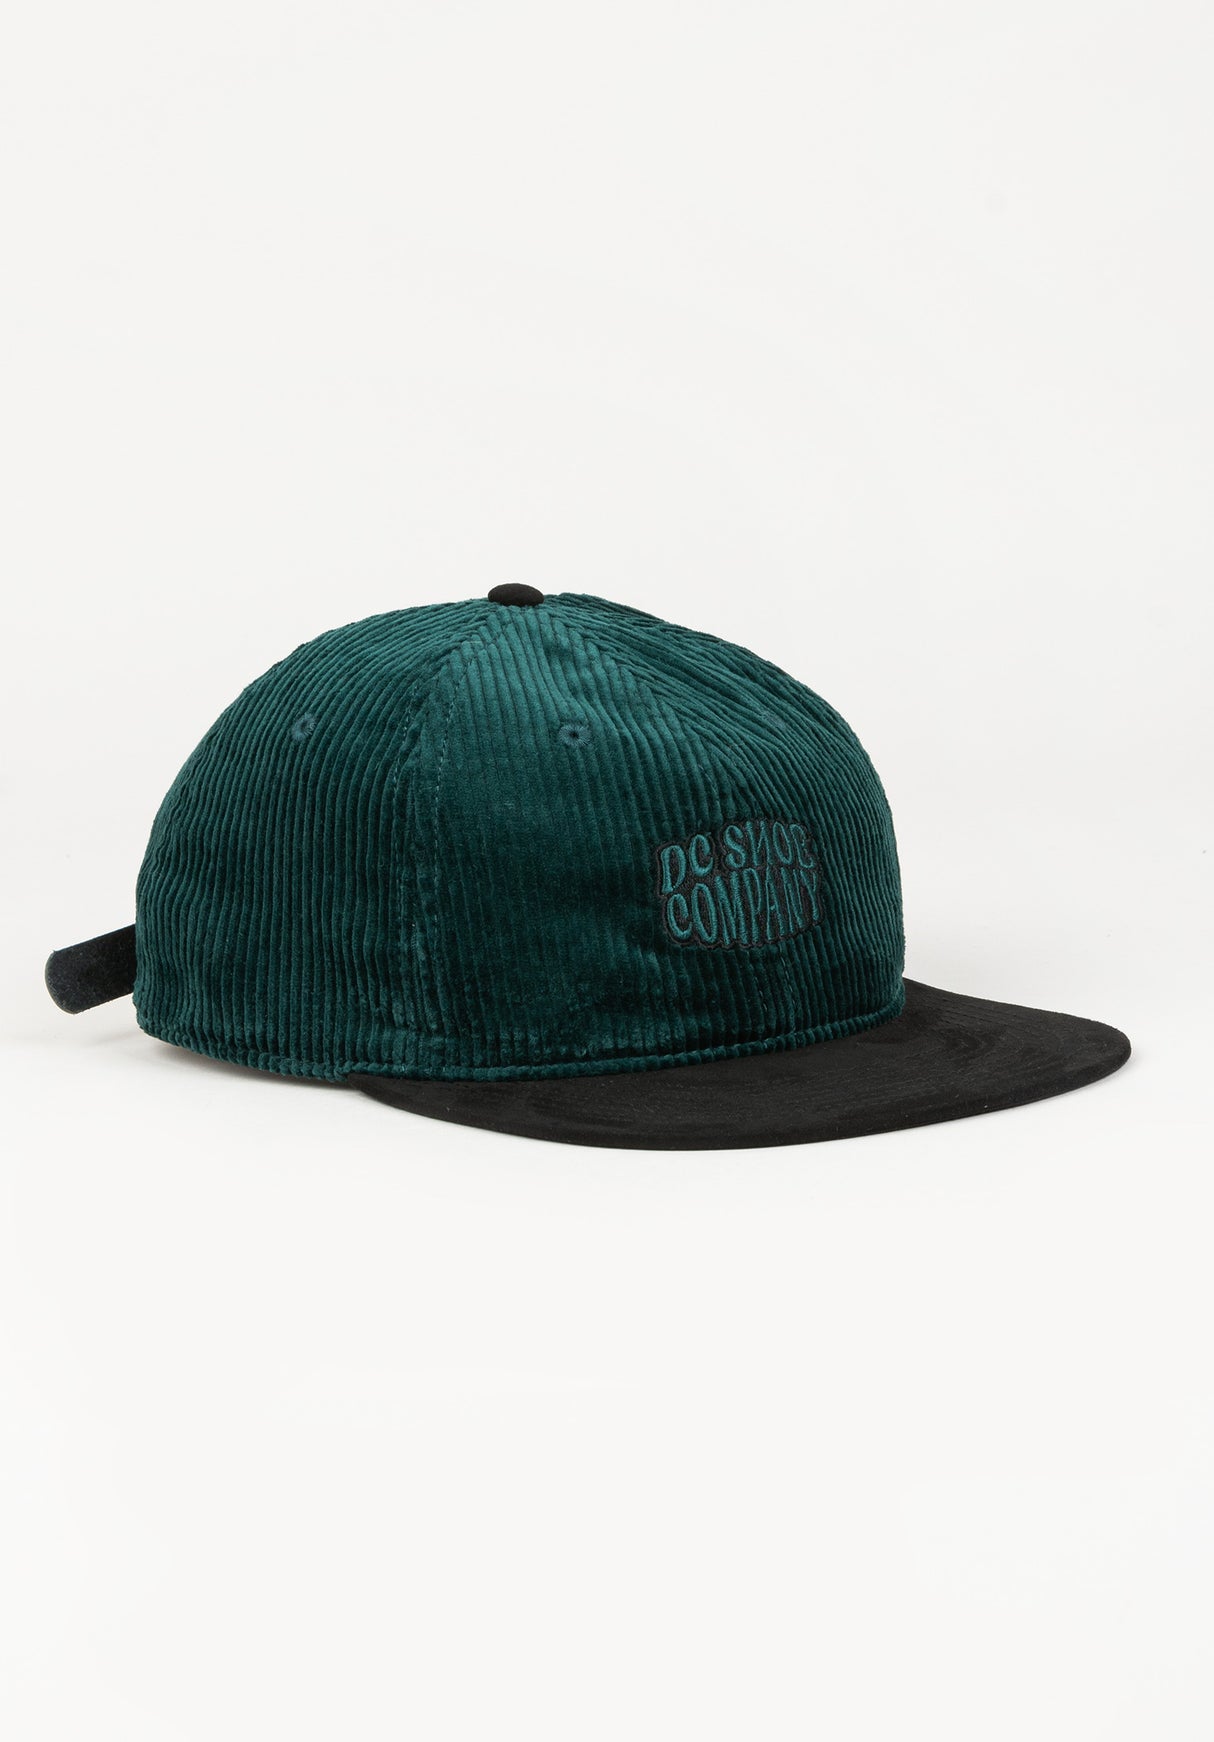 Cypher Strapback DC Shoes Cap for Men TITUS – in sycamore